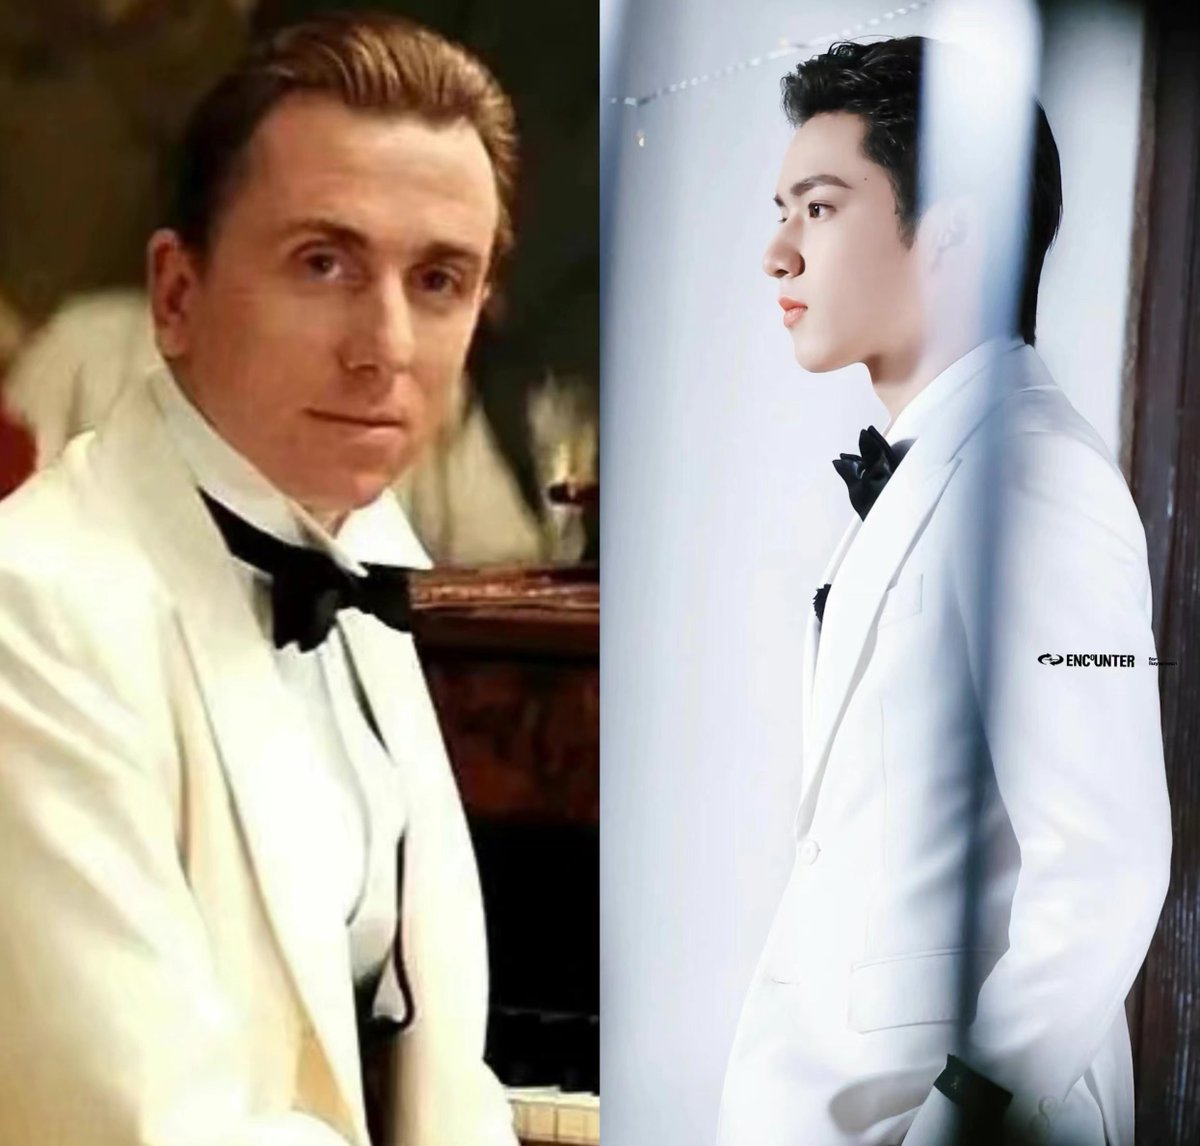 Chinese young artist #刘耀文(#liuyaowen)impersonated the character #1990 played by #timroth in the classic movie #thelegendof1900.

Liu has also done his best to perform such a well-known character. Good work deserves to be remembered by the world.